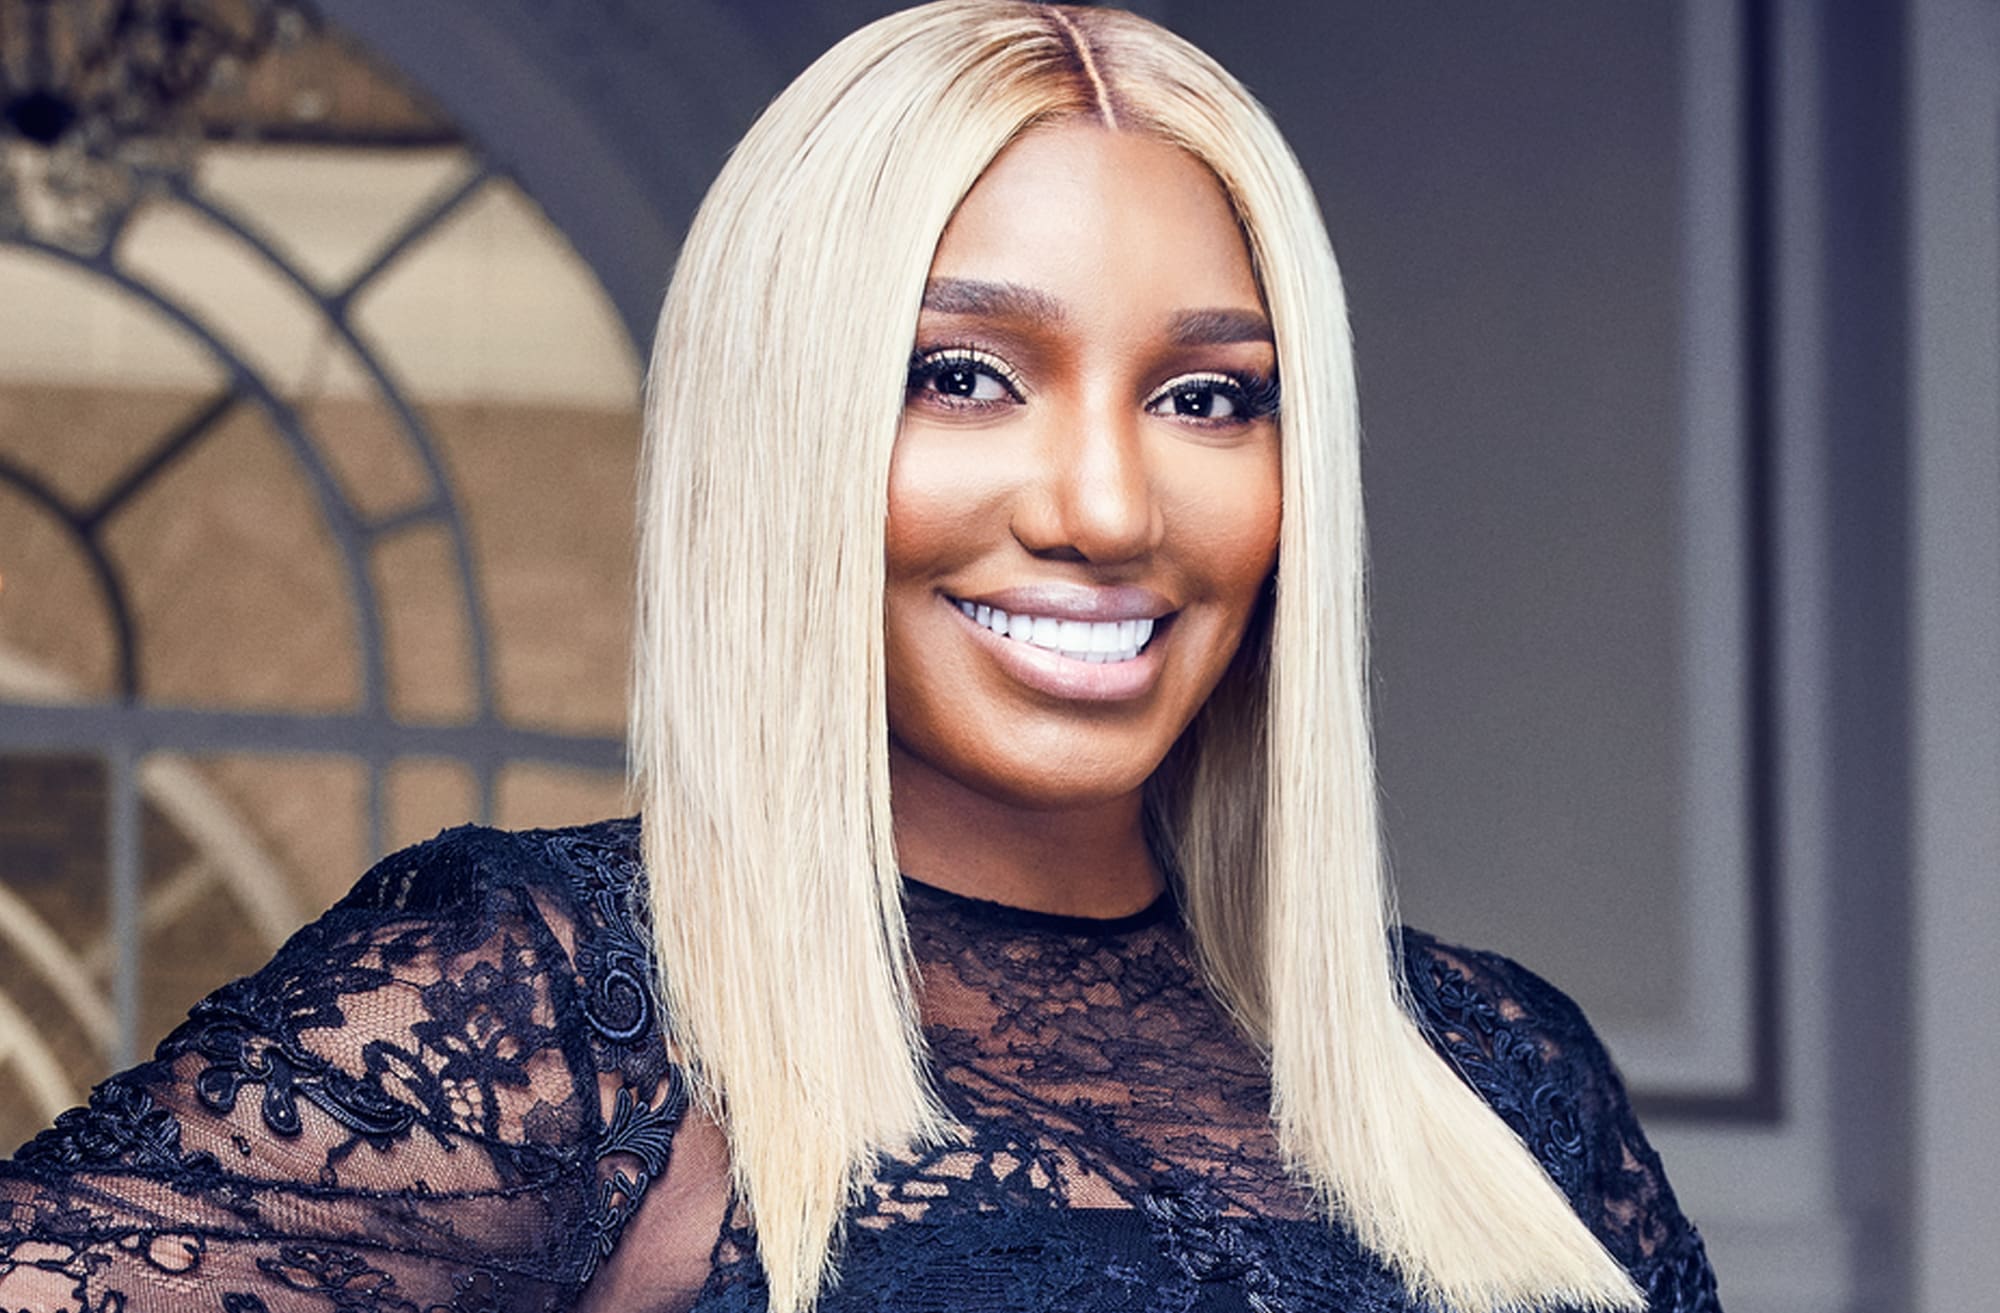 nene-leakes-films-clips-with-her-new-man-see-them-here